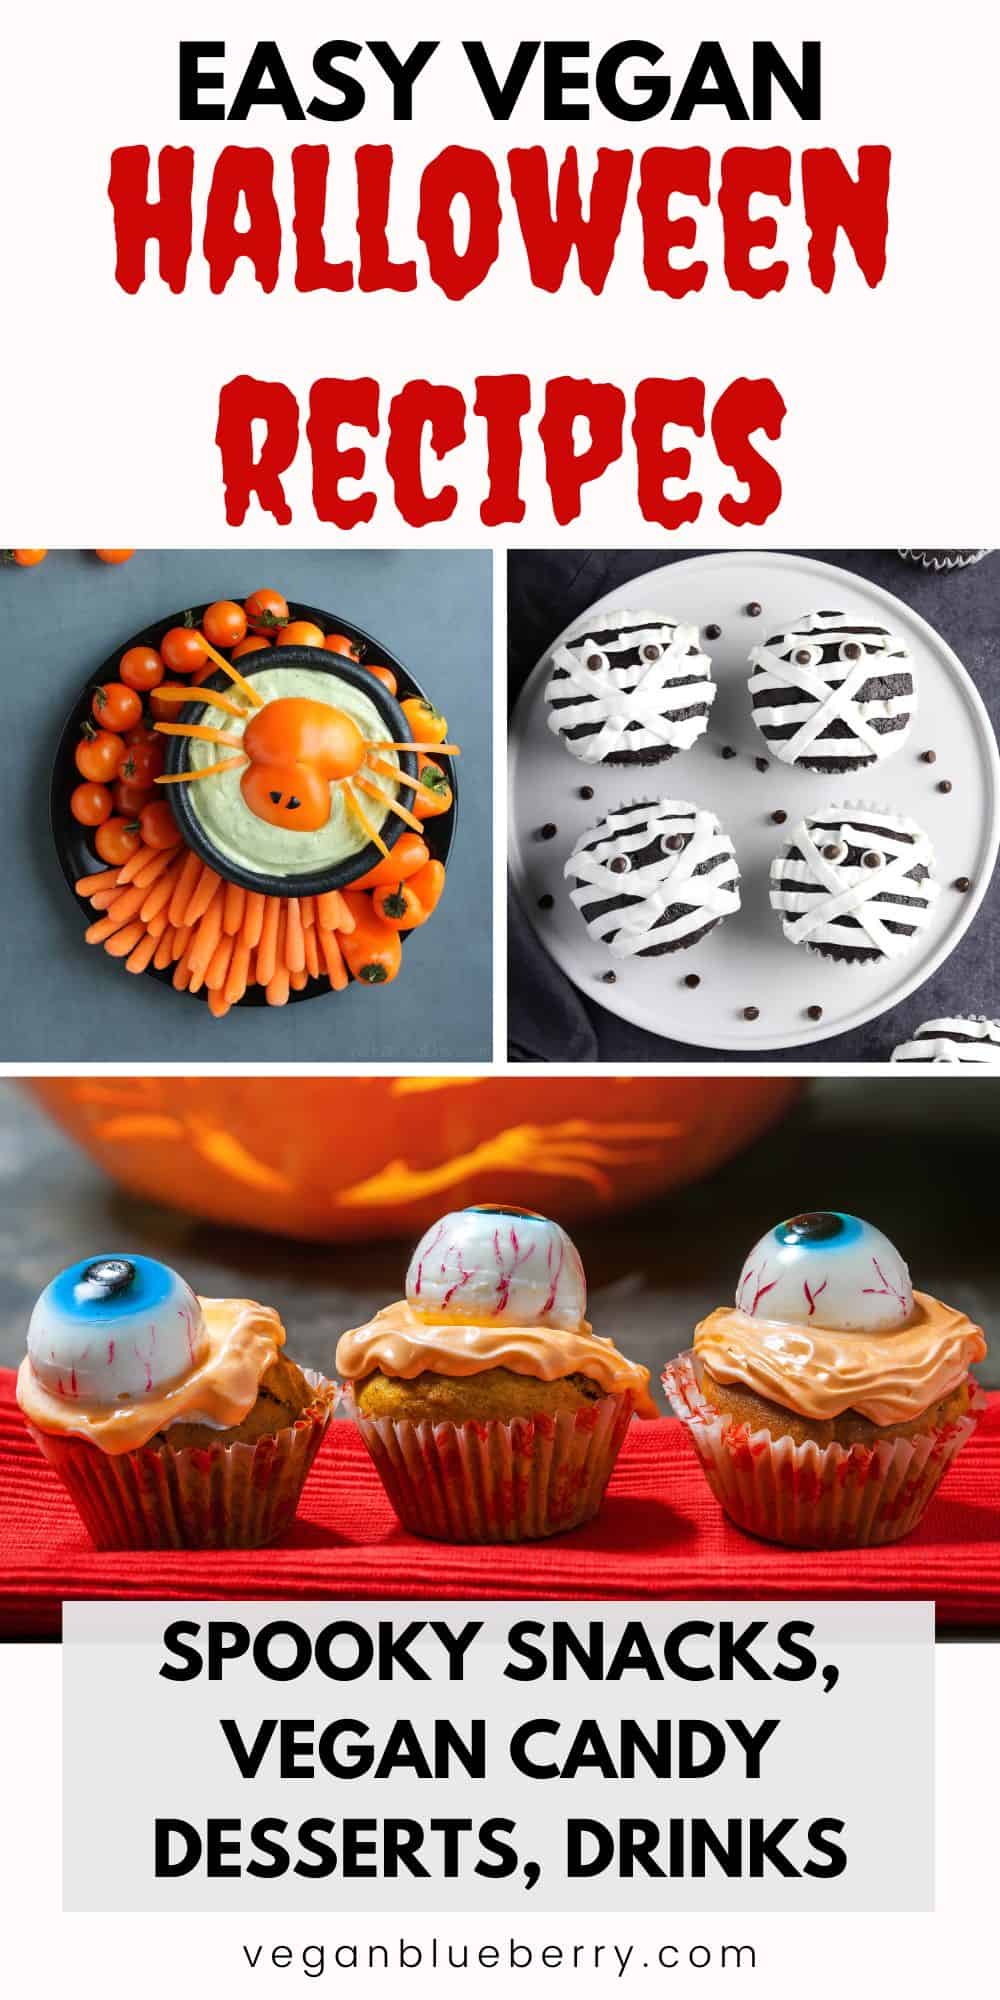 Pinterest image with text: Easy vegan Halloween recipes - spooky snacks, vegan candy, desserts, drinks